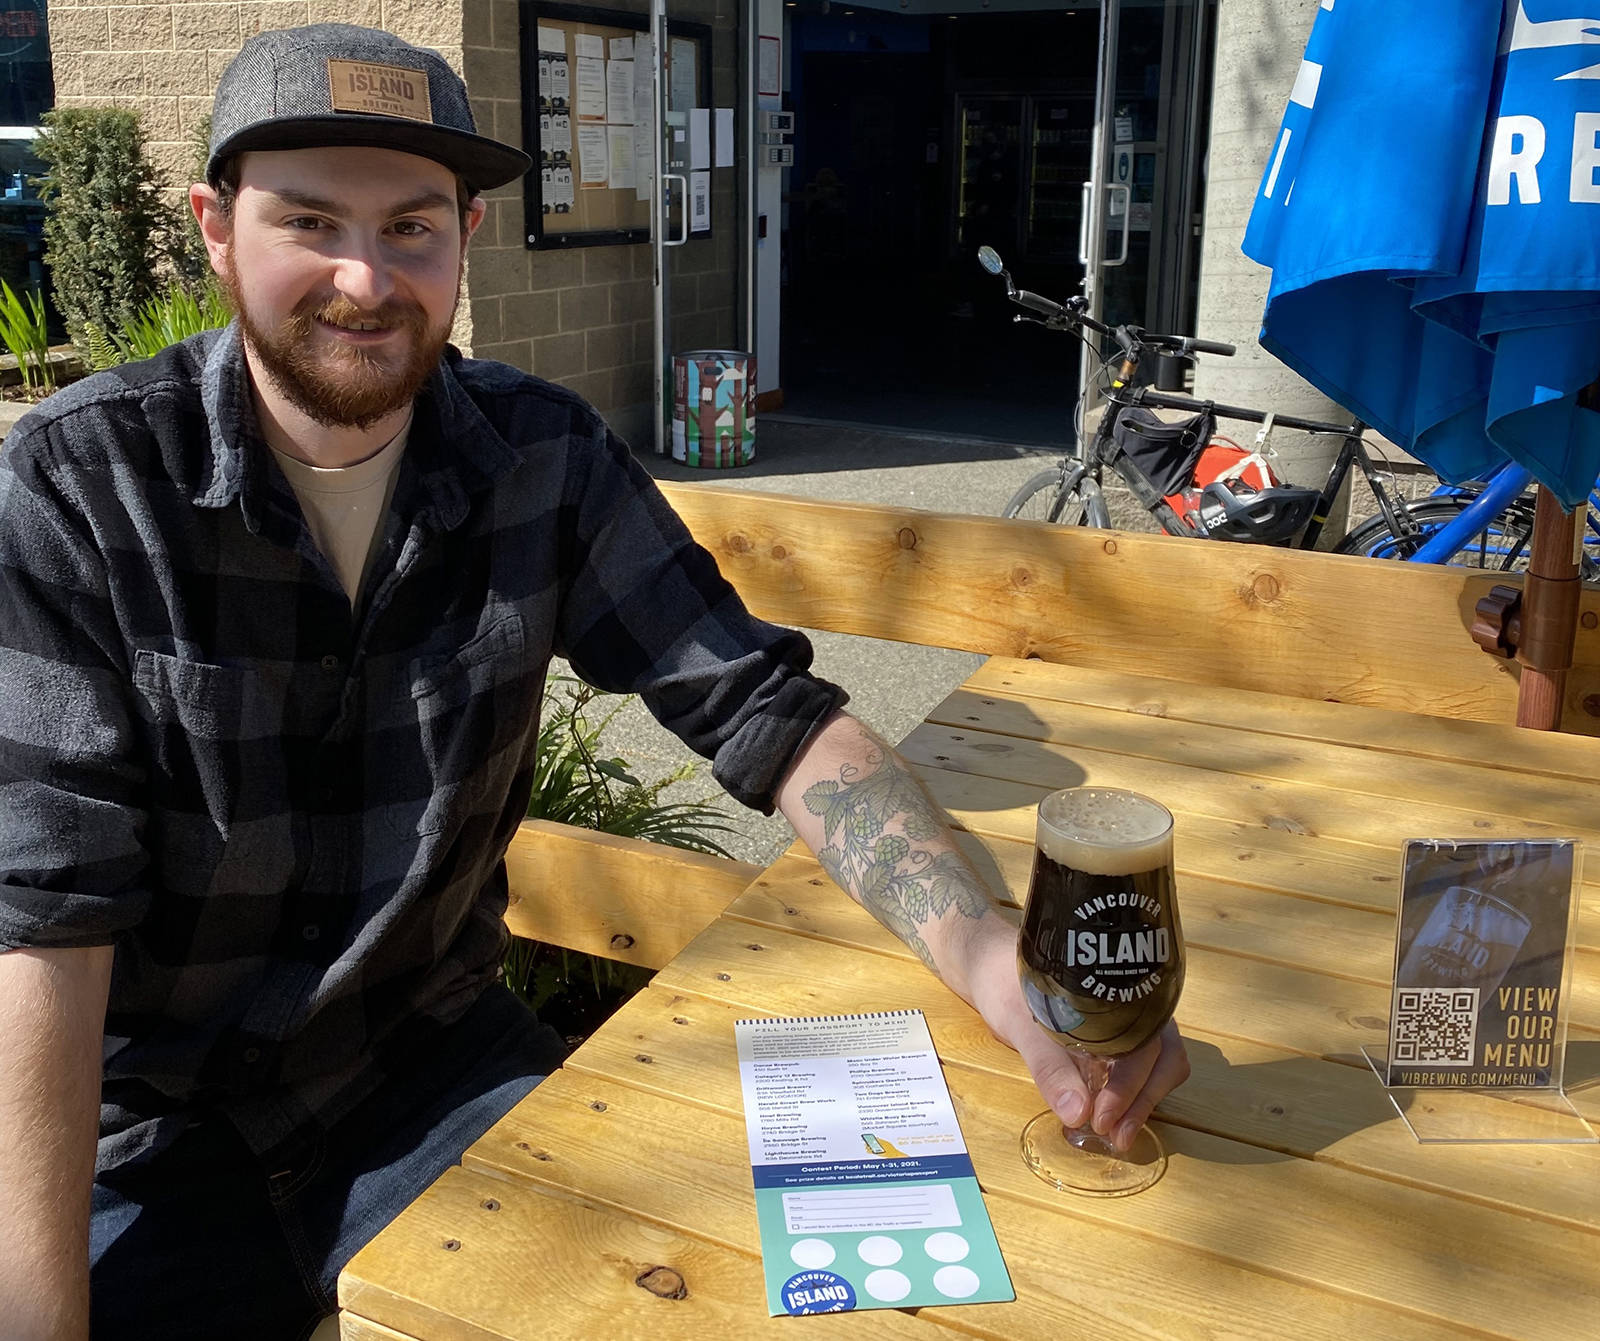 From May 1 to 31, pick up a Victoria Ale Trail passport from your favourite craft brewery, including Vancouver Island Brewing and embark on a local tasting tour, collecting stamps along the way. Photo courtesy BC Ale Trail.